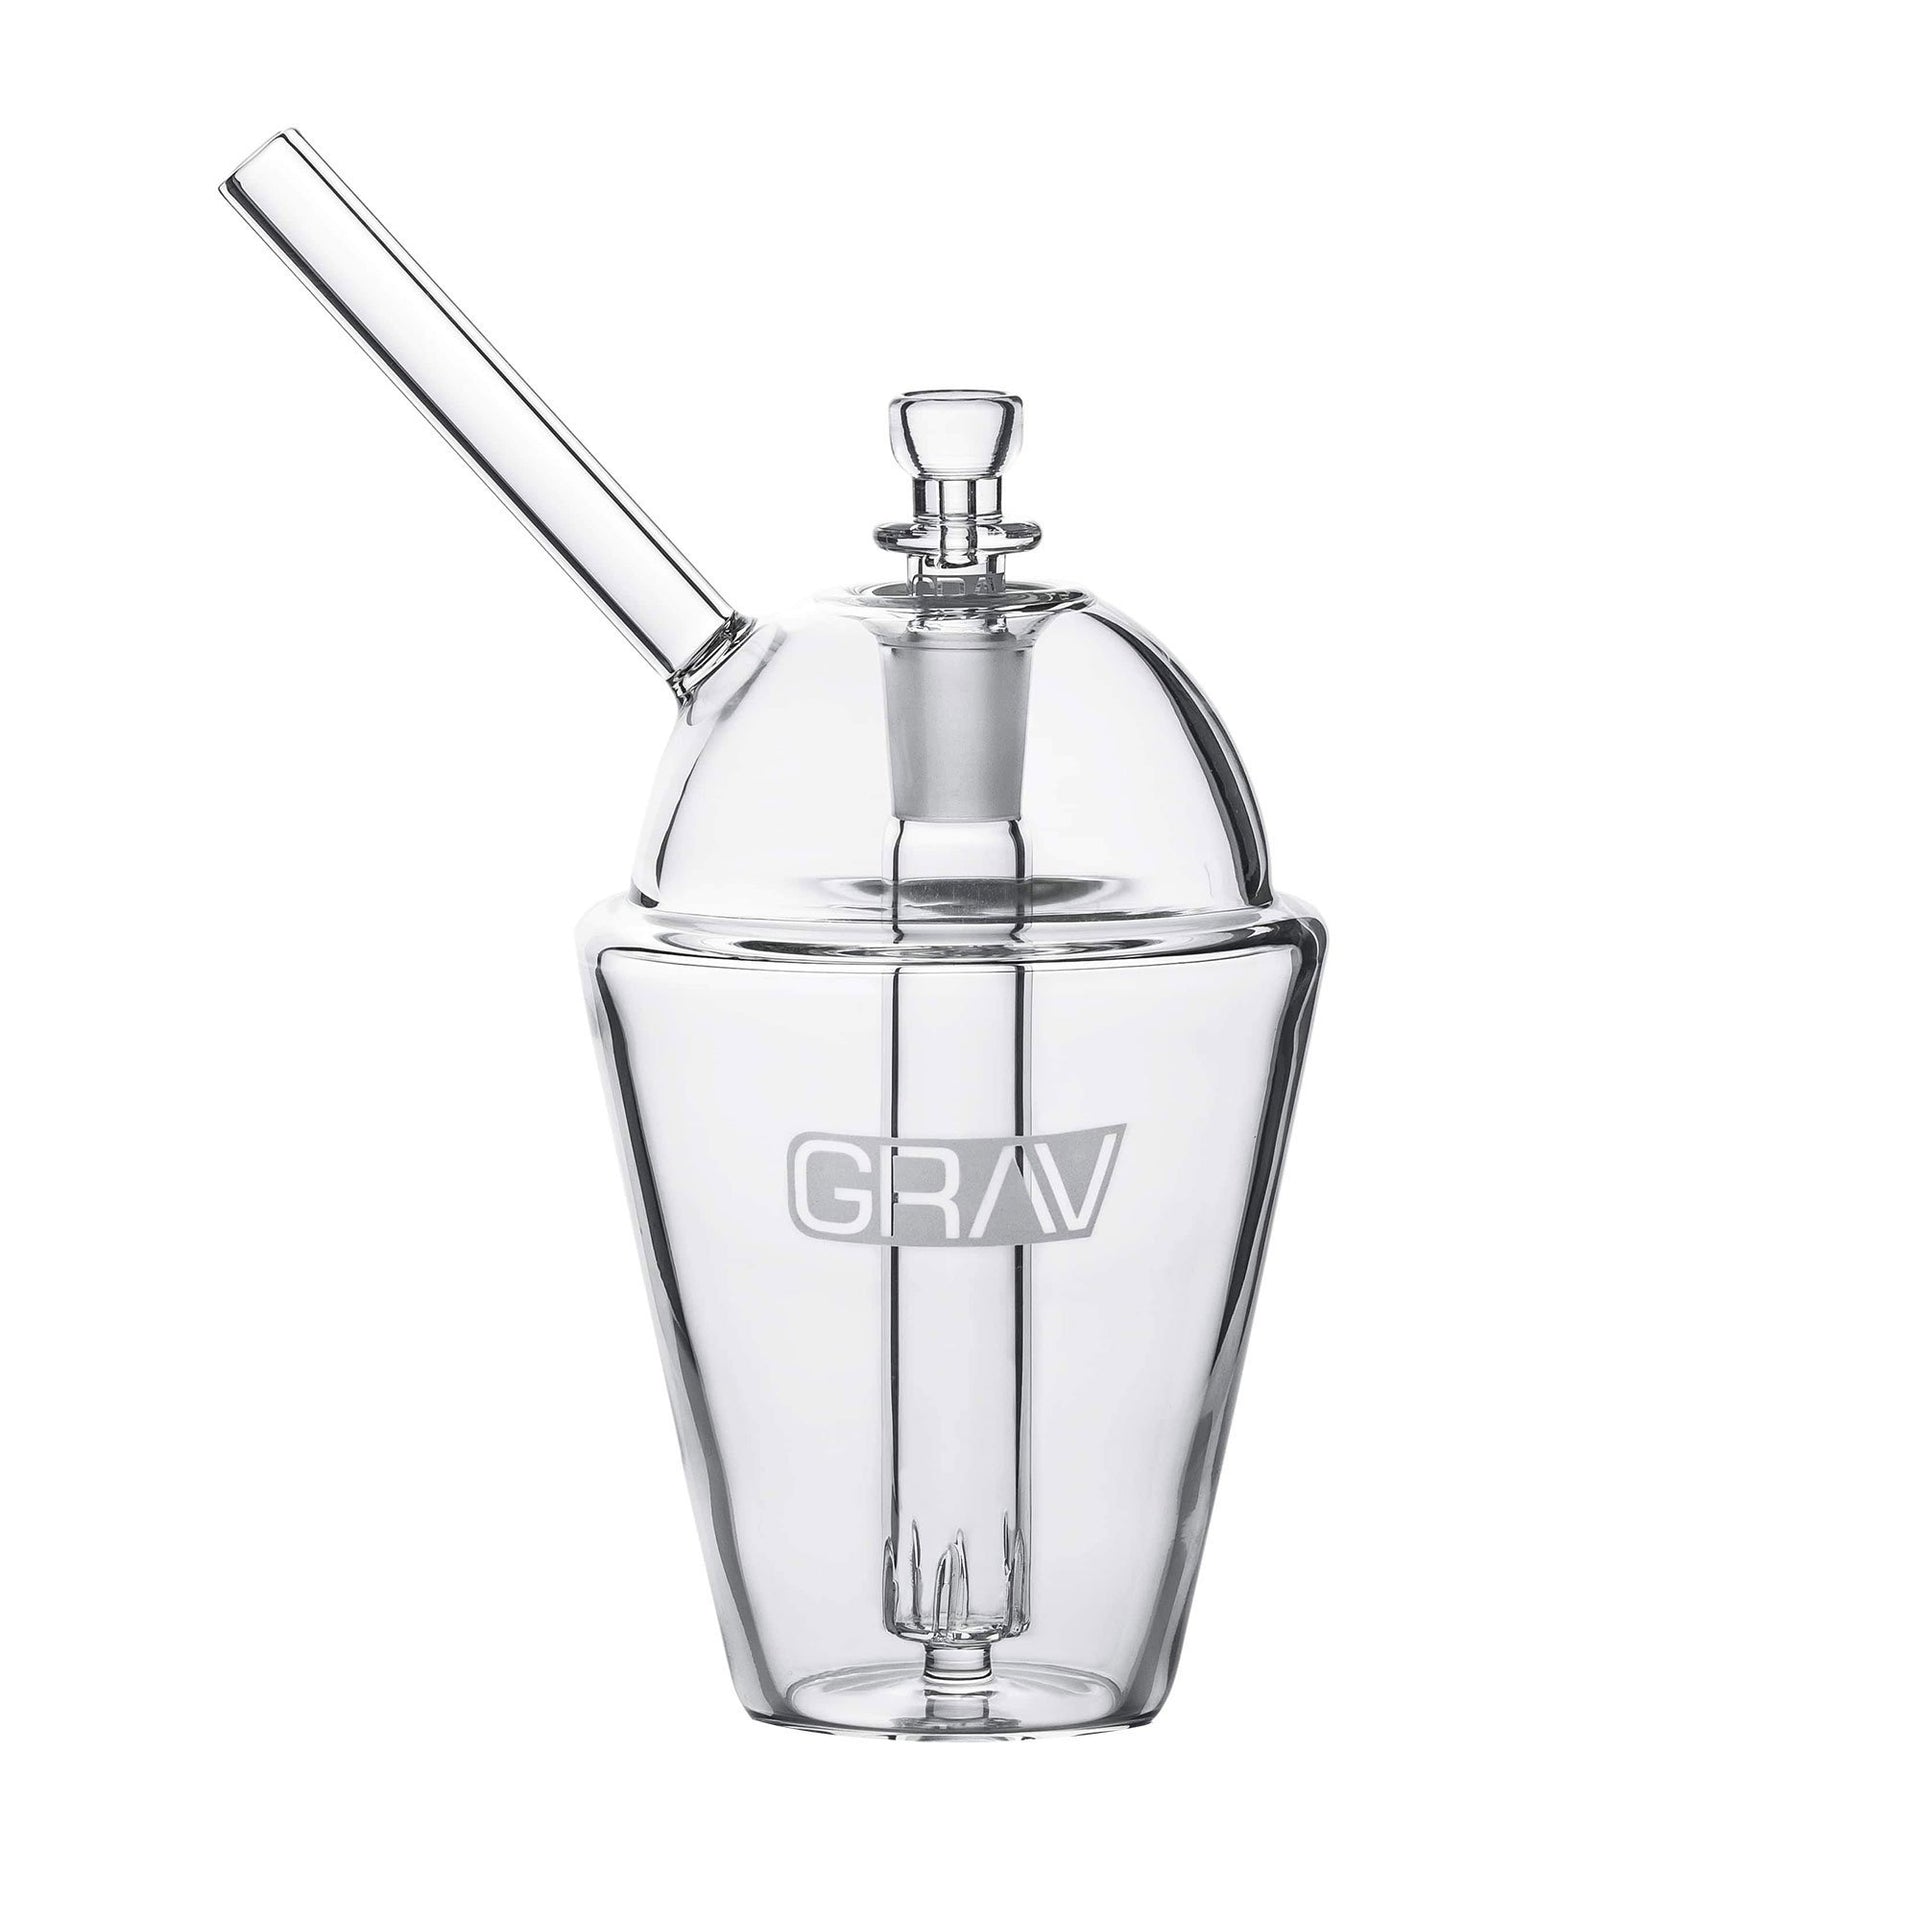 GRAV Cup Bowl - 420 Science - The most trusted online smoke shop.